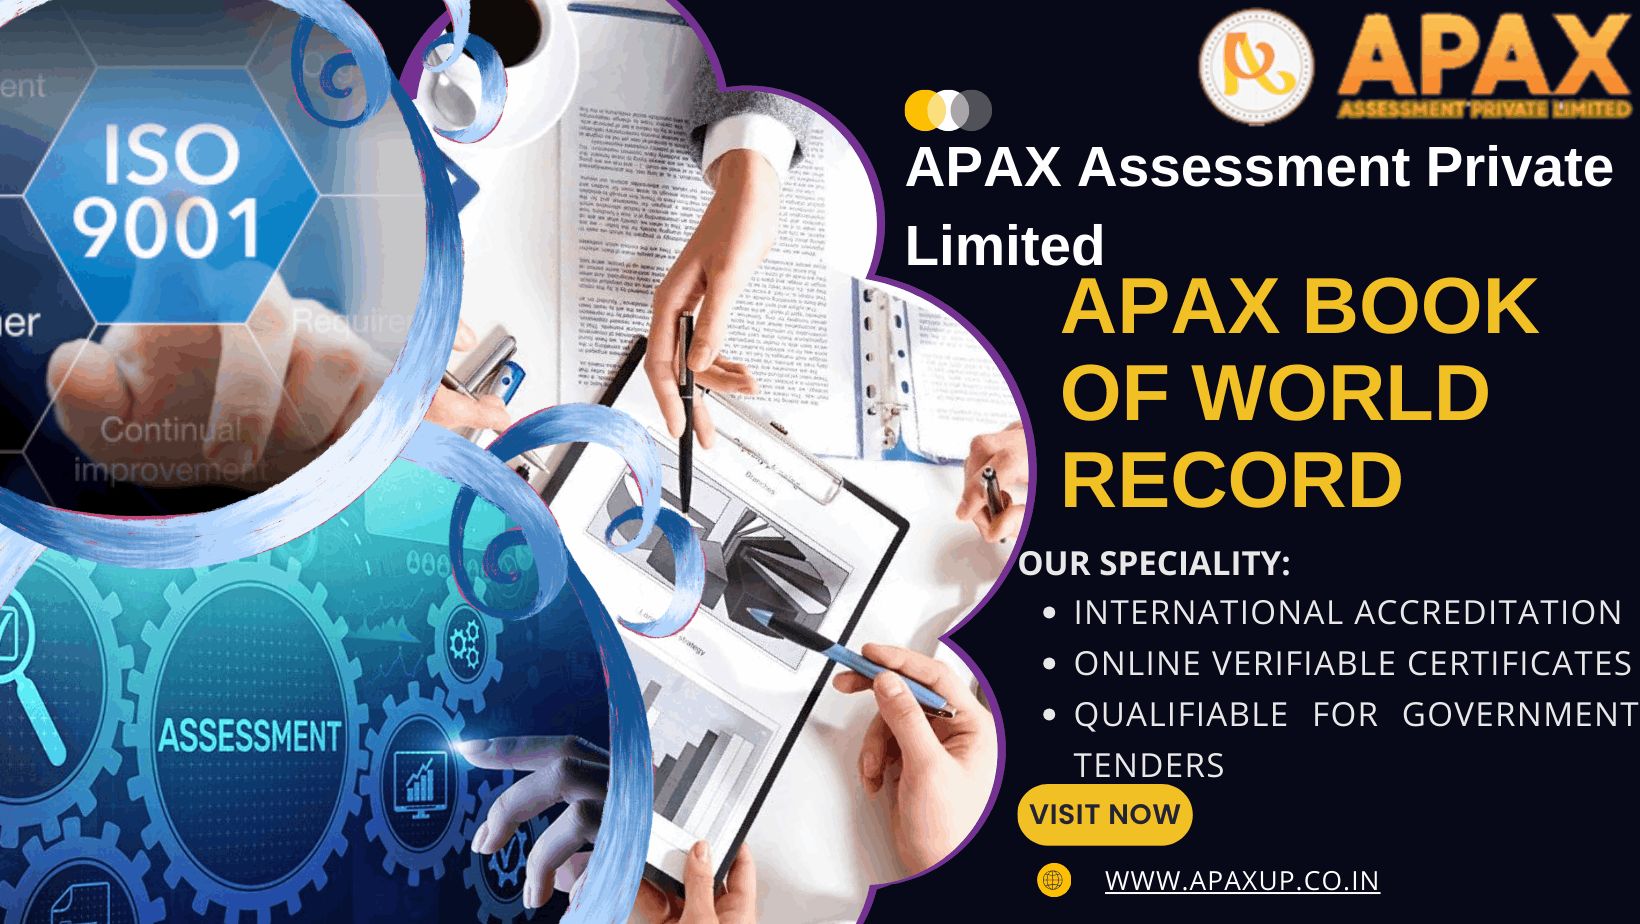 APAX Assessment Private Limited